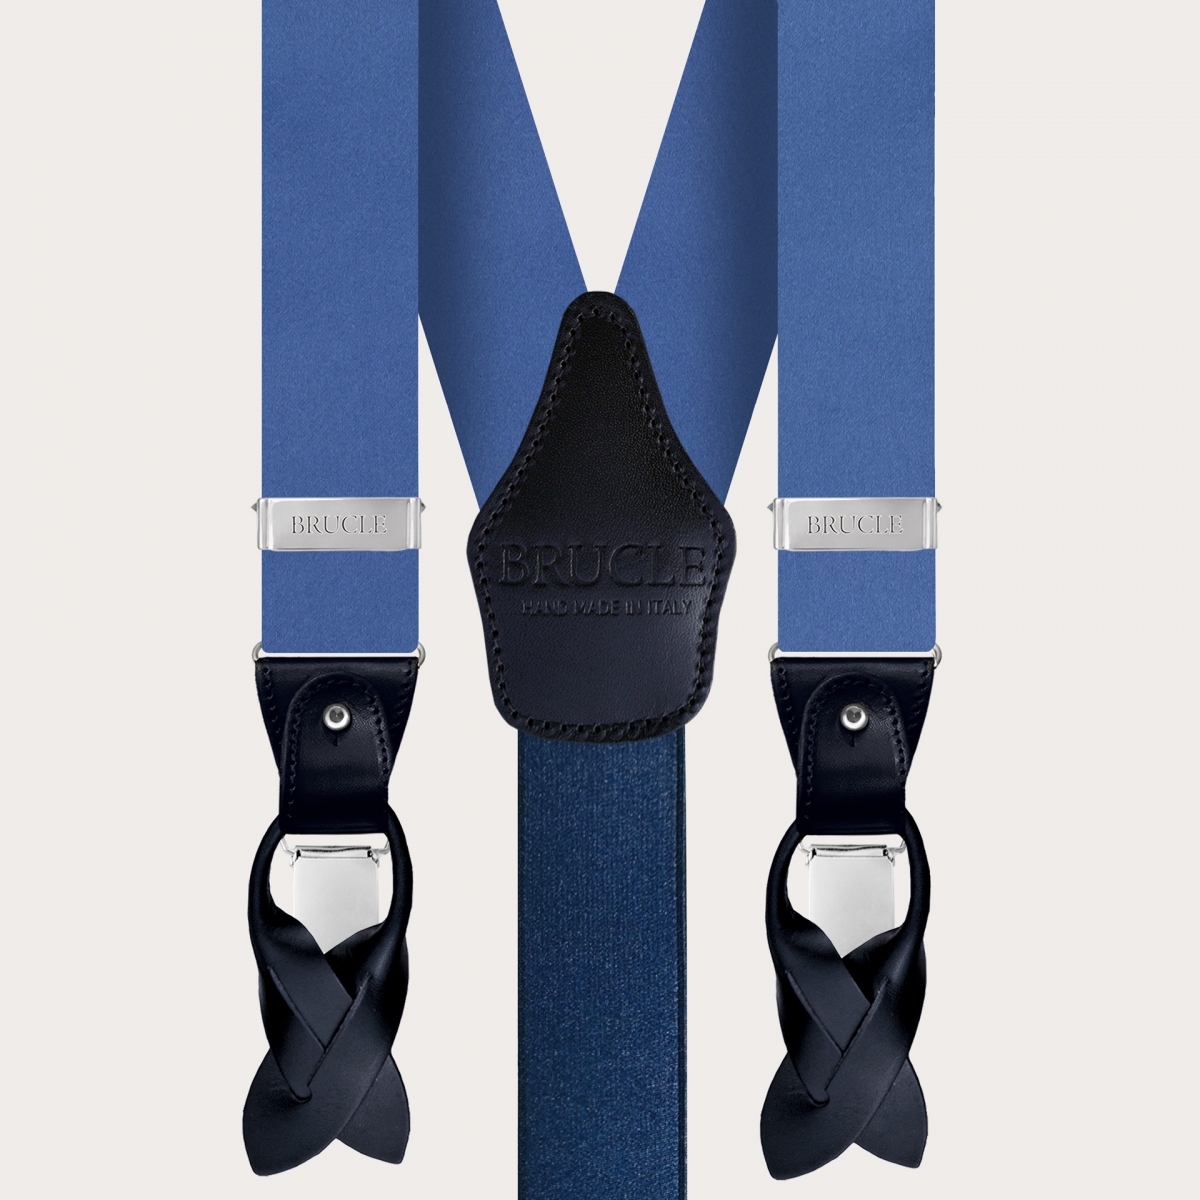 BRUCLE Coordinated set of suspenders and bow tie, light blue silk satin